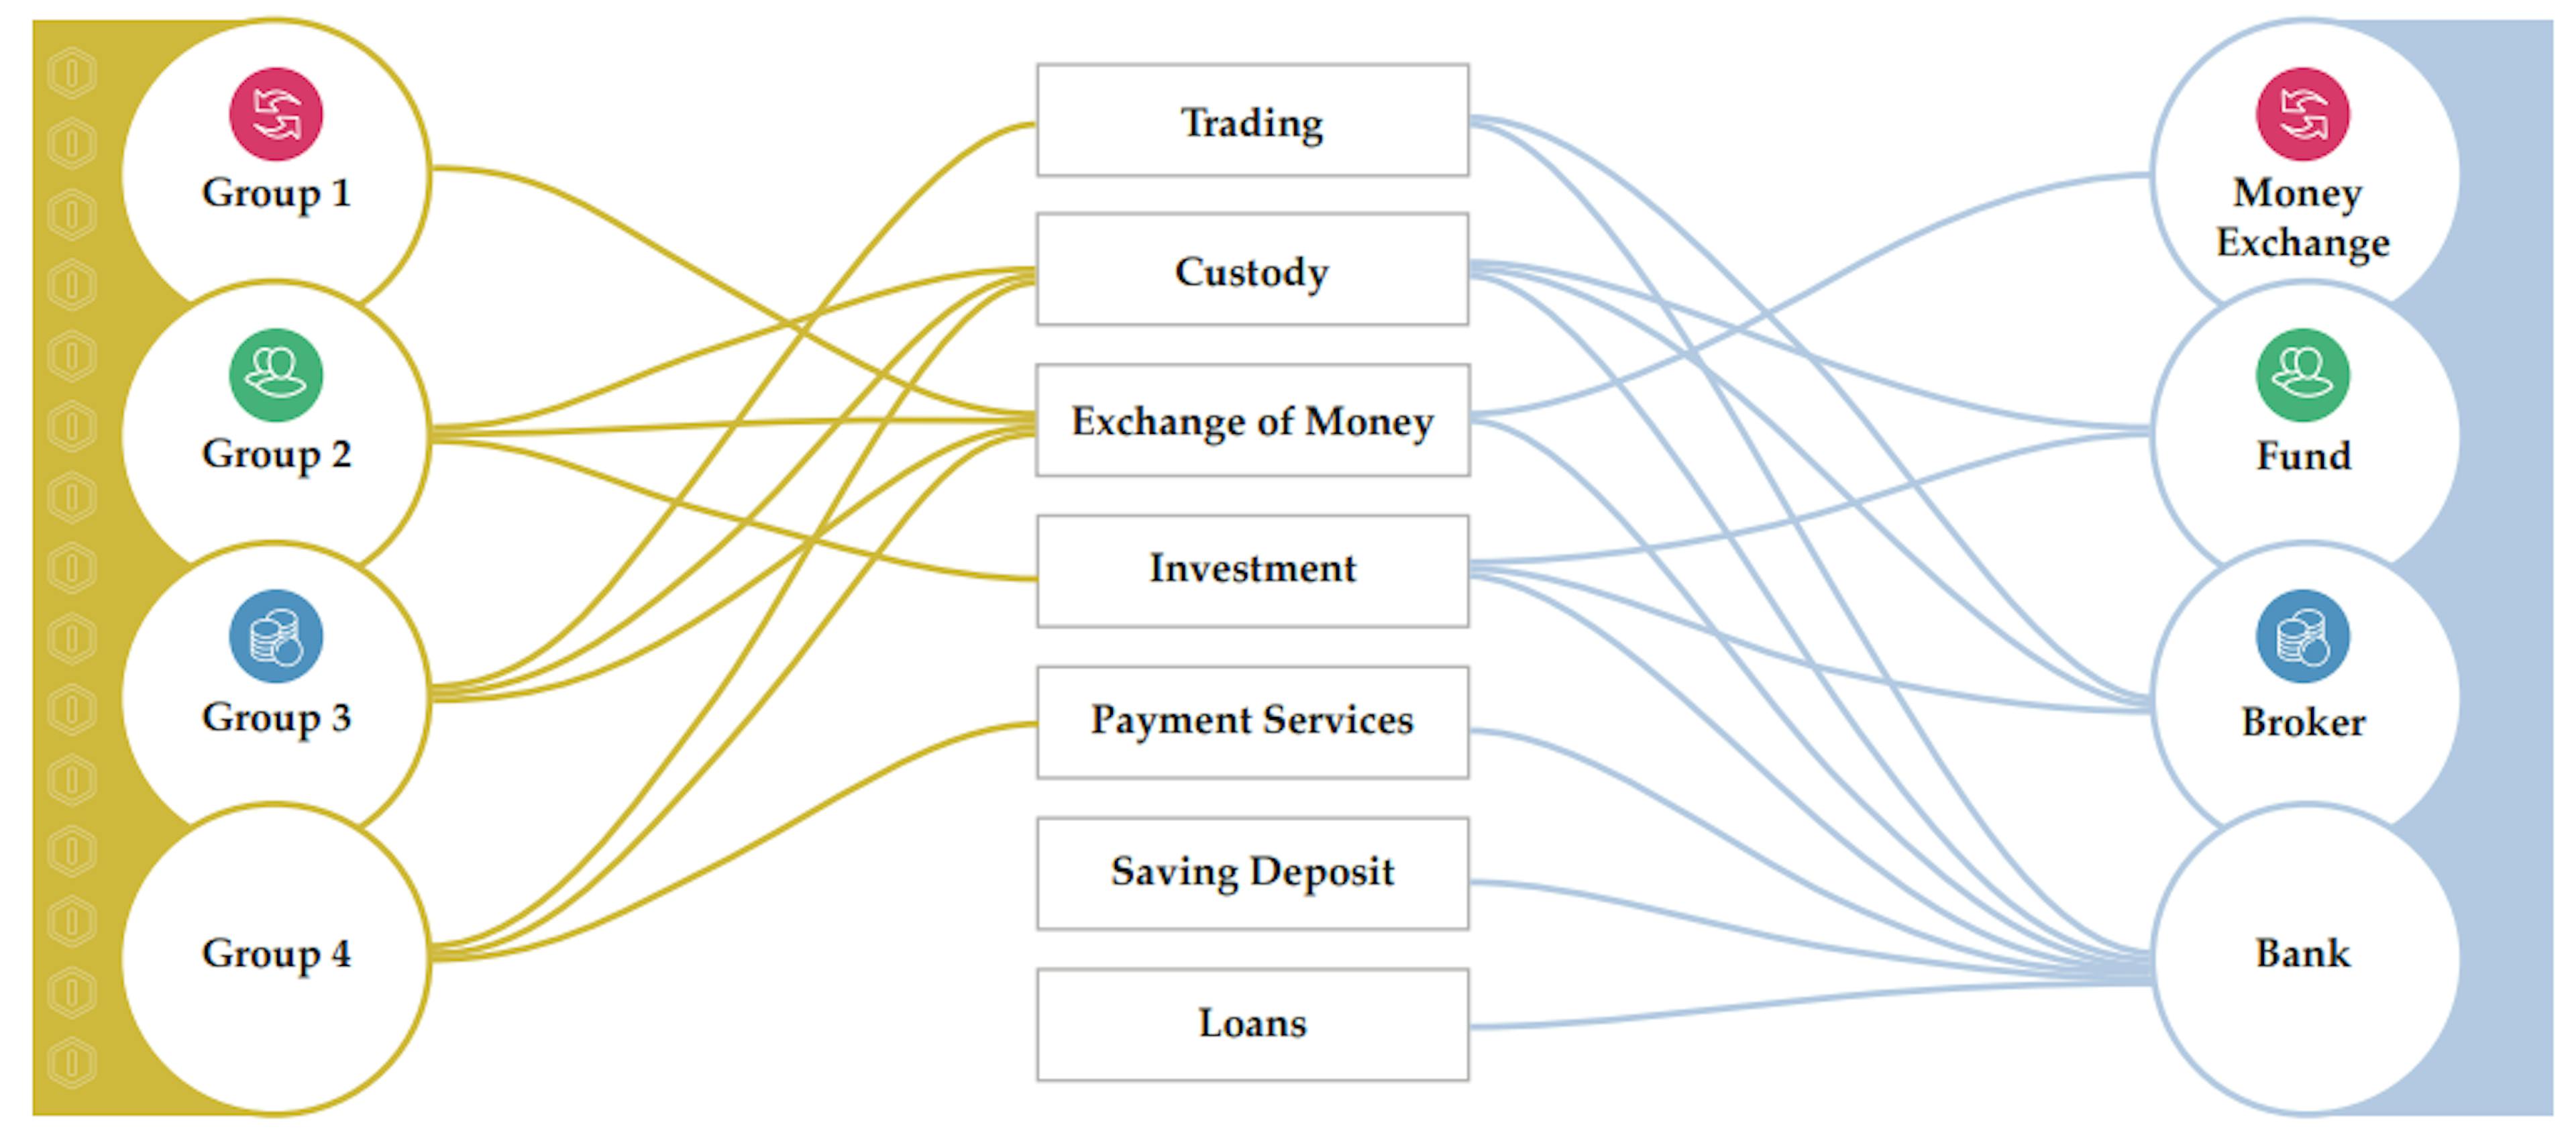 Figure 4: Comparison of traditional financial intermediaries with VASPs. Circles on the left represent VASPs, divided into groups as described in Figure 3, while on the right are traditional financial intermediaries. Links point to the financial functions offered by each financial intermediary. VASPs are most similar to money exchanges, brokers, and funds, rather than banks. The colors in the circles highlight what traditional intermediary each group is most similar to.